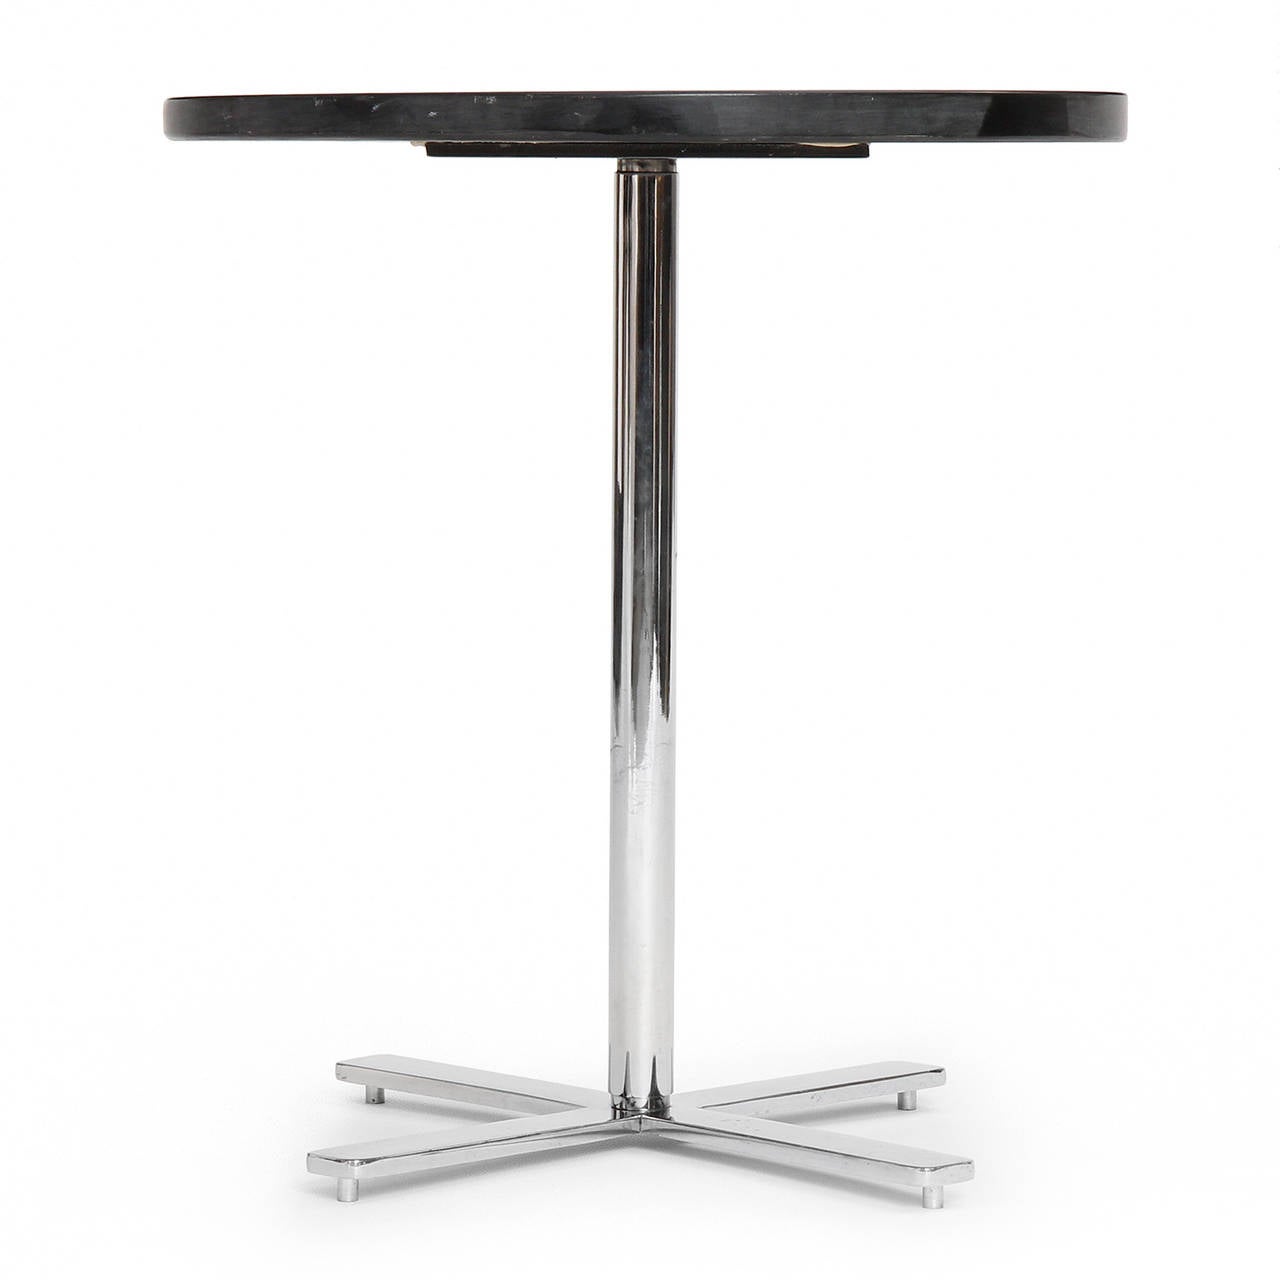 A refined, minimalist and excellent quality occasional or side table having a circular polished slate top floating above a polished chromed steel stem on a cruciform base.